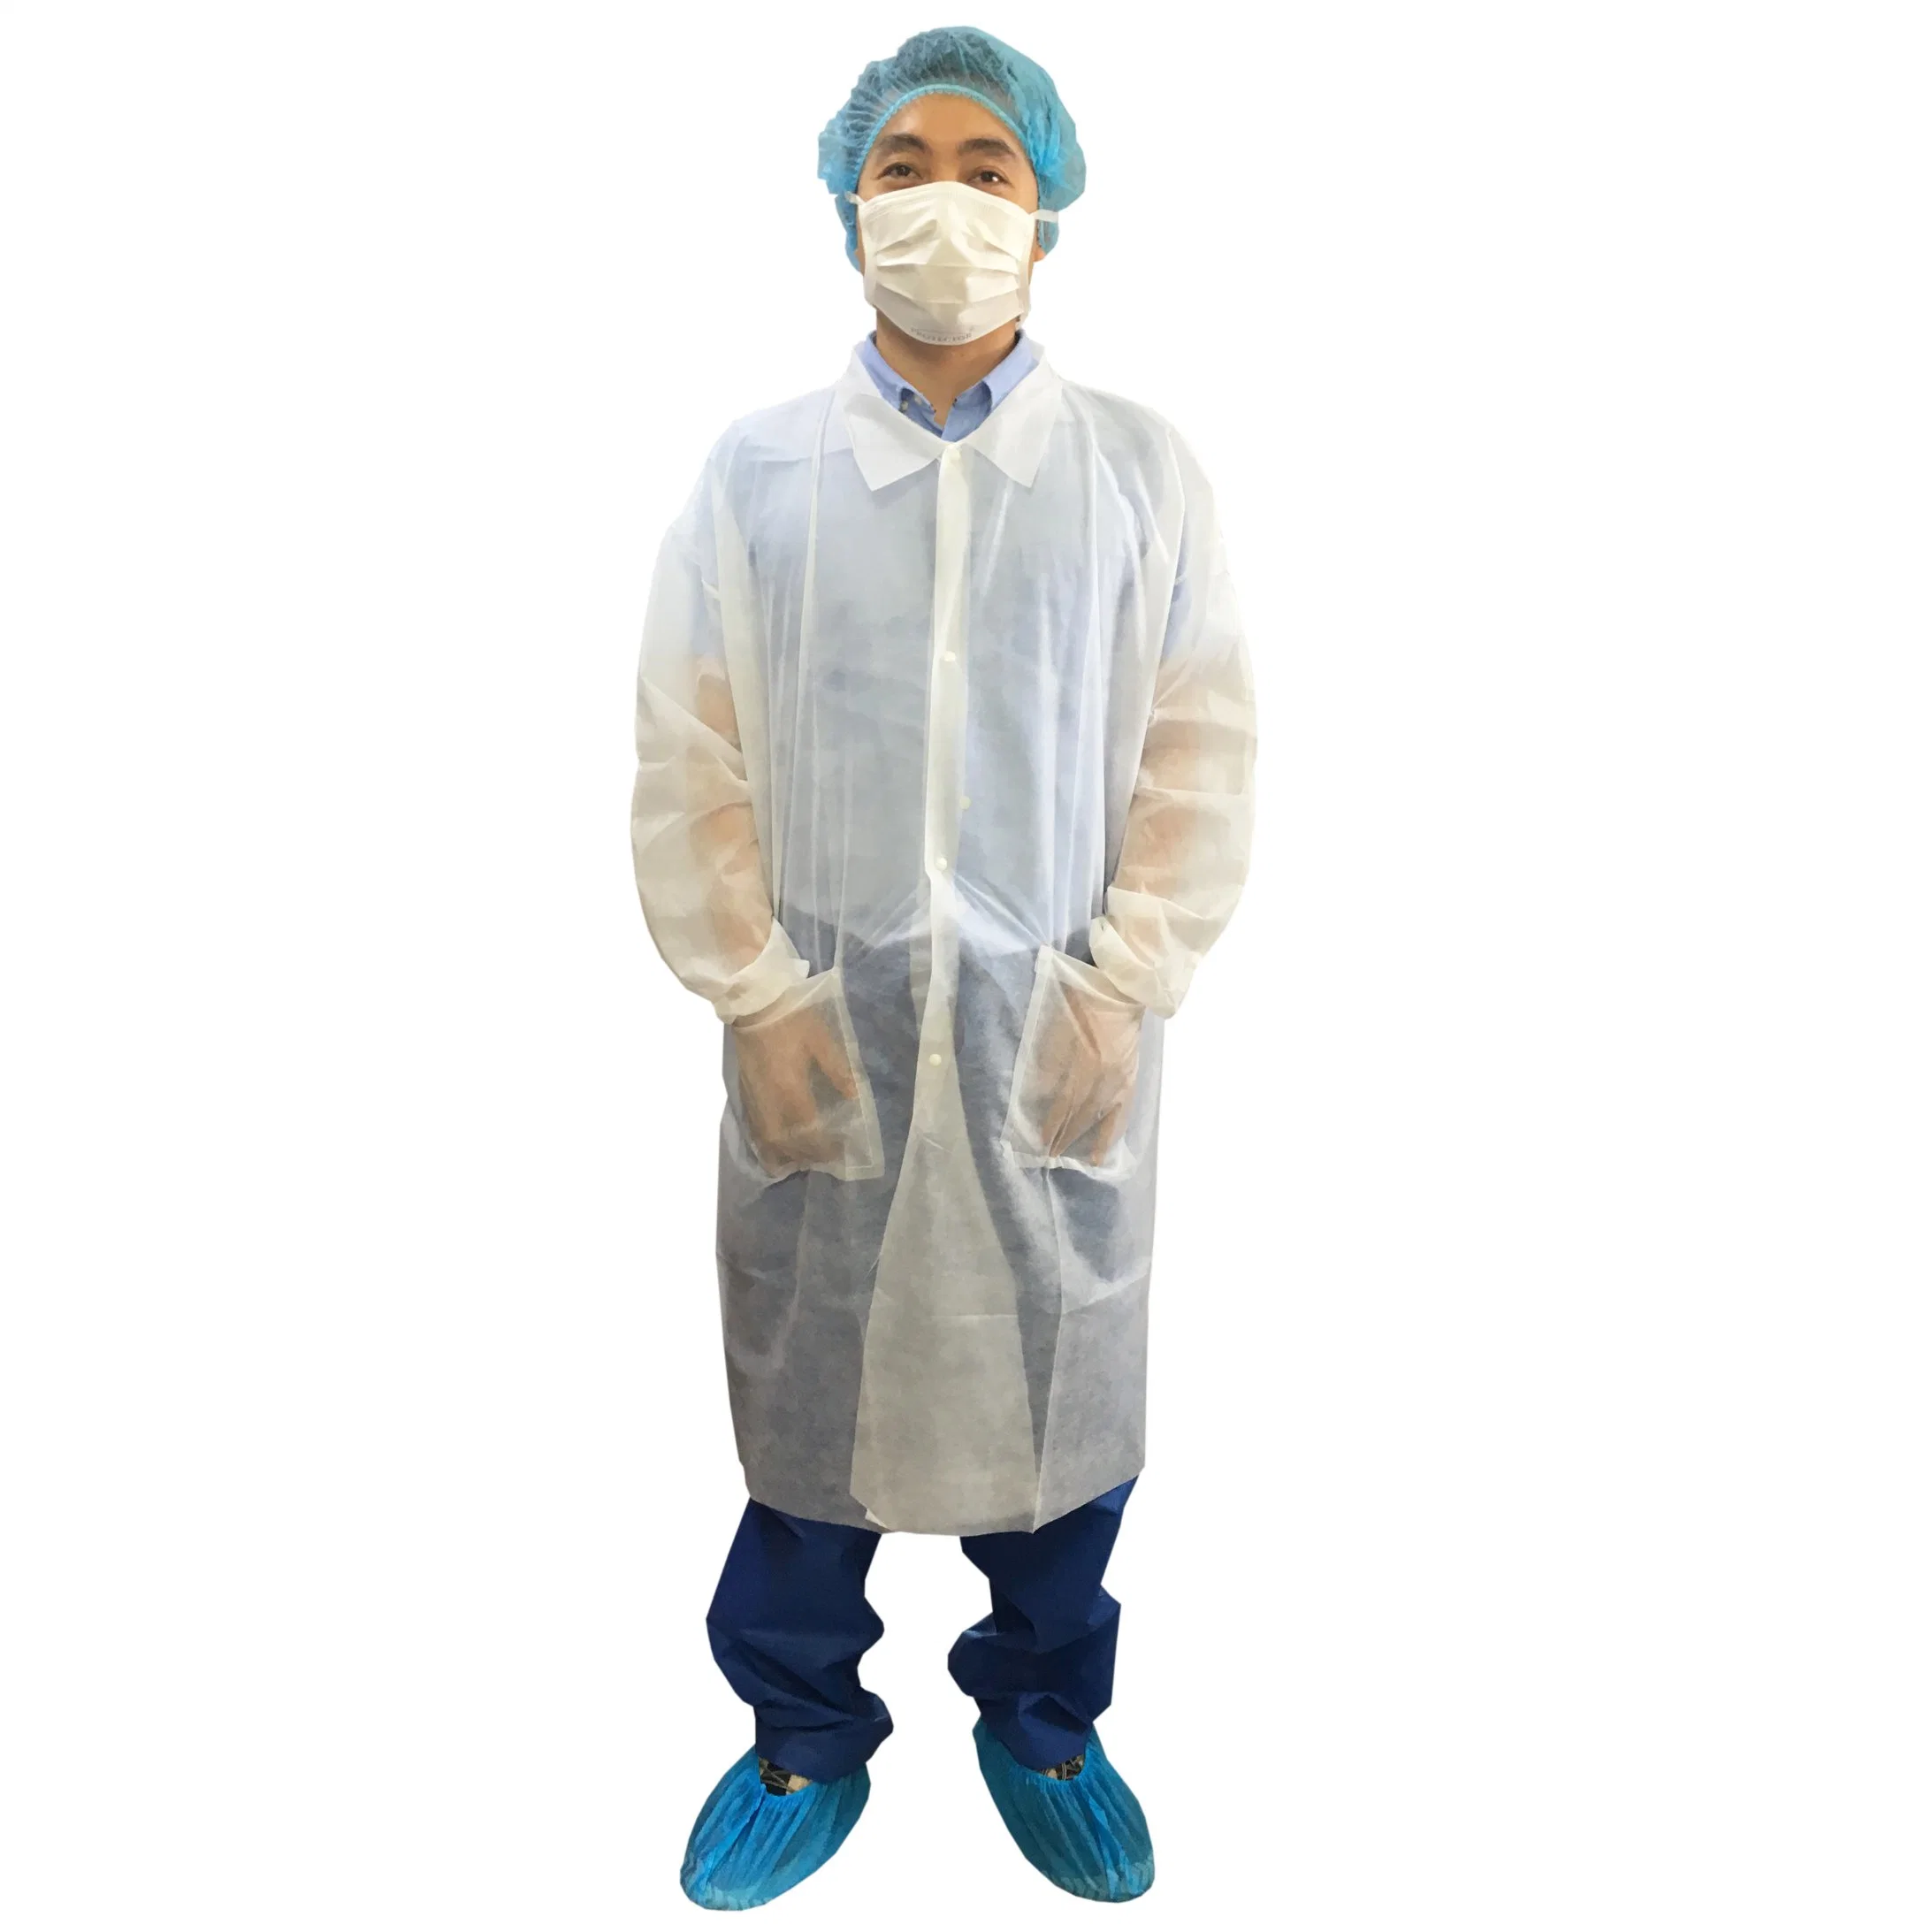 Medical, Daily and Surgical Use Non-Toxicity Disposable Nonwoven Shoe Cover